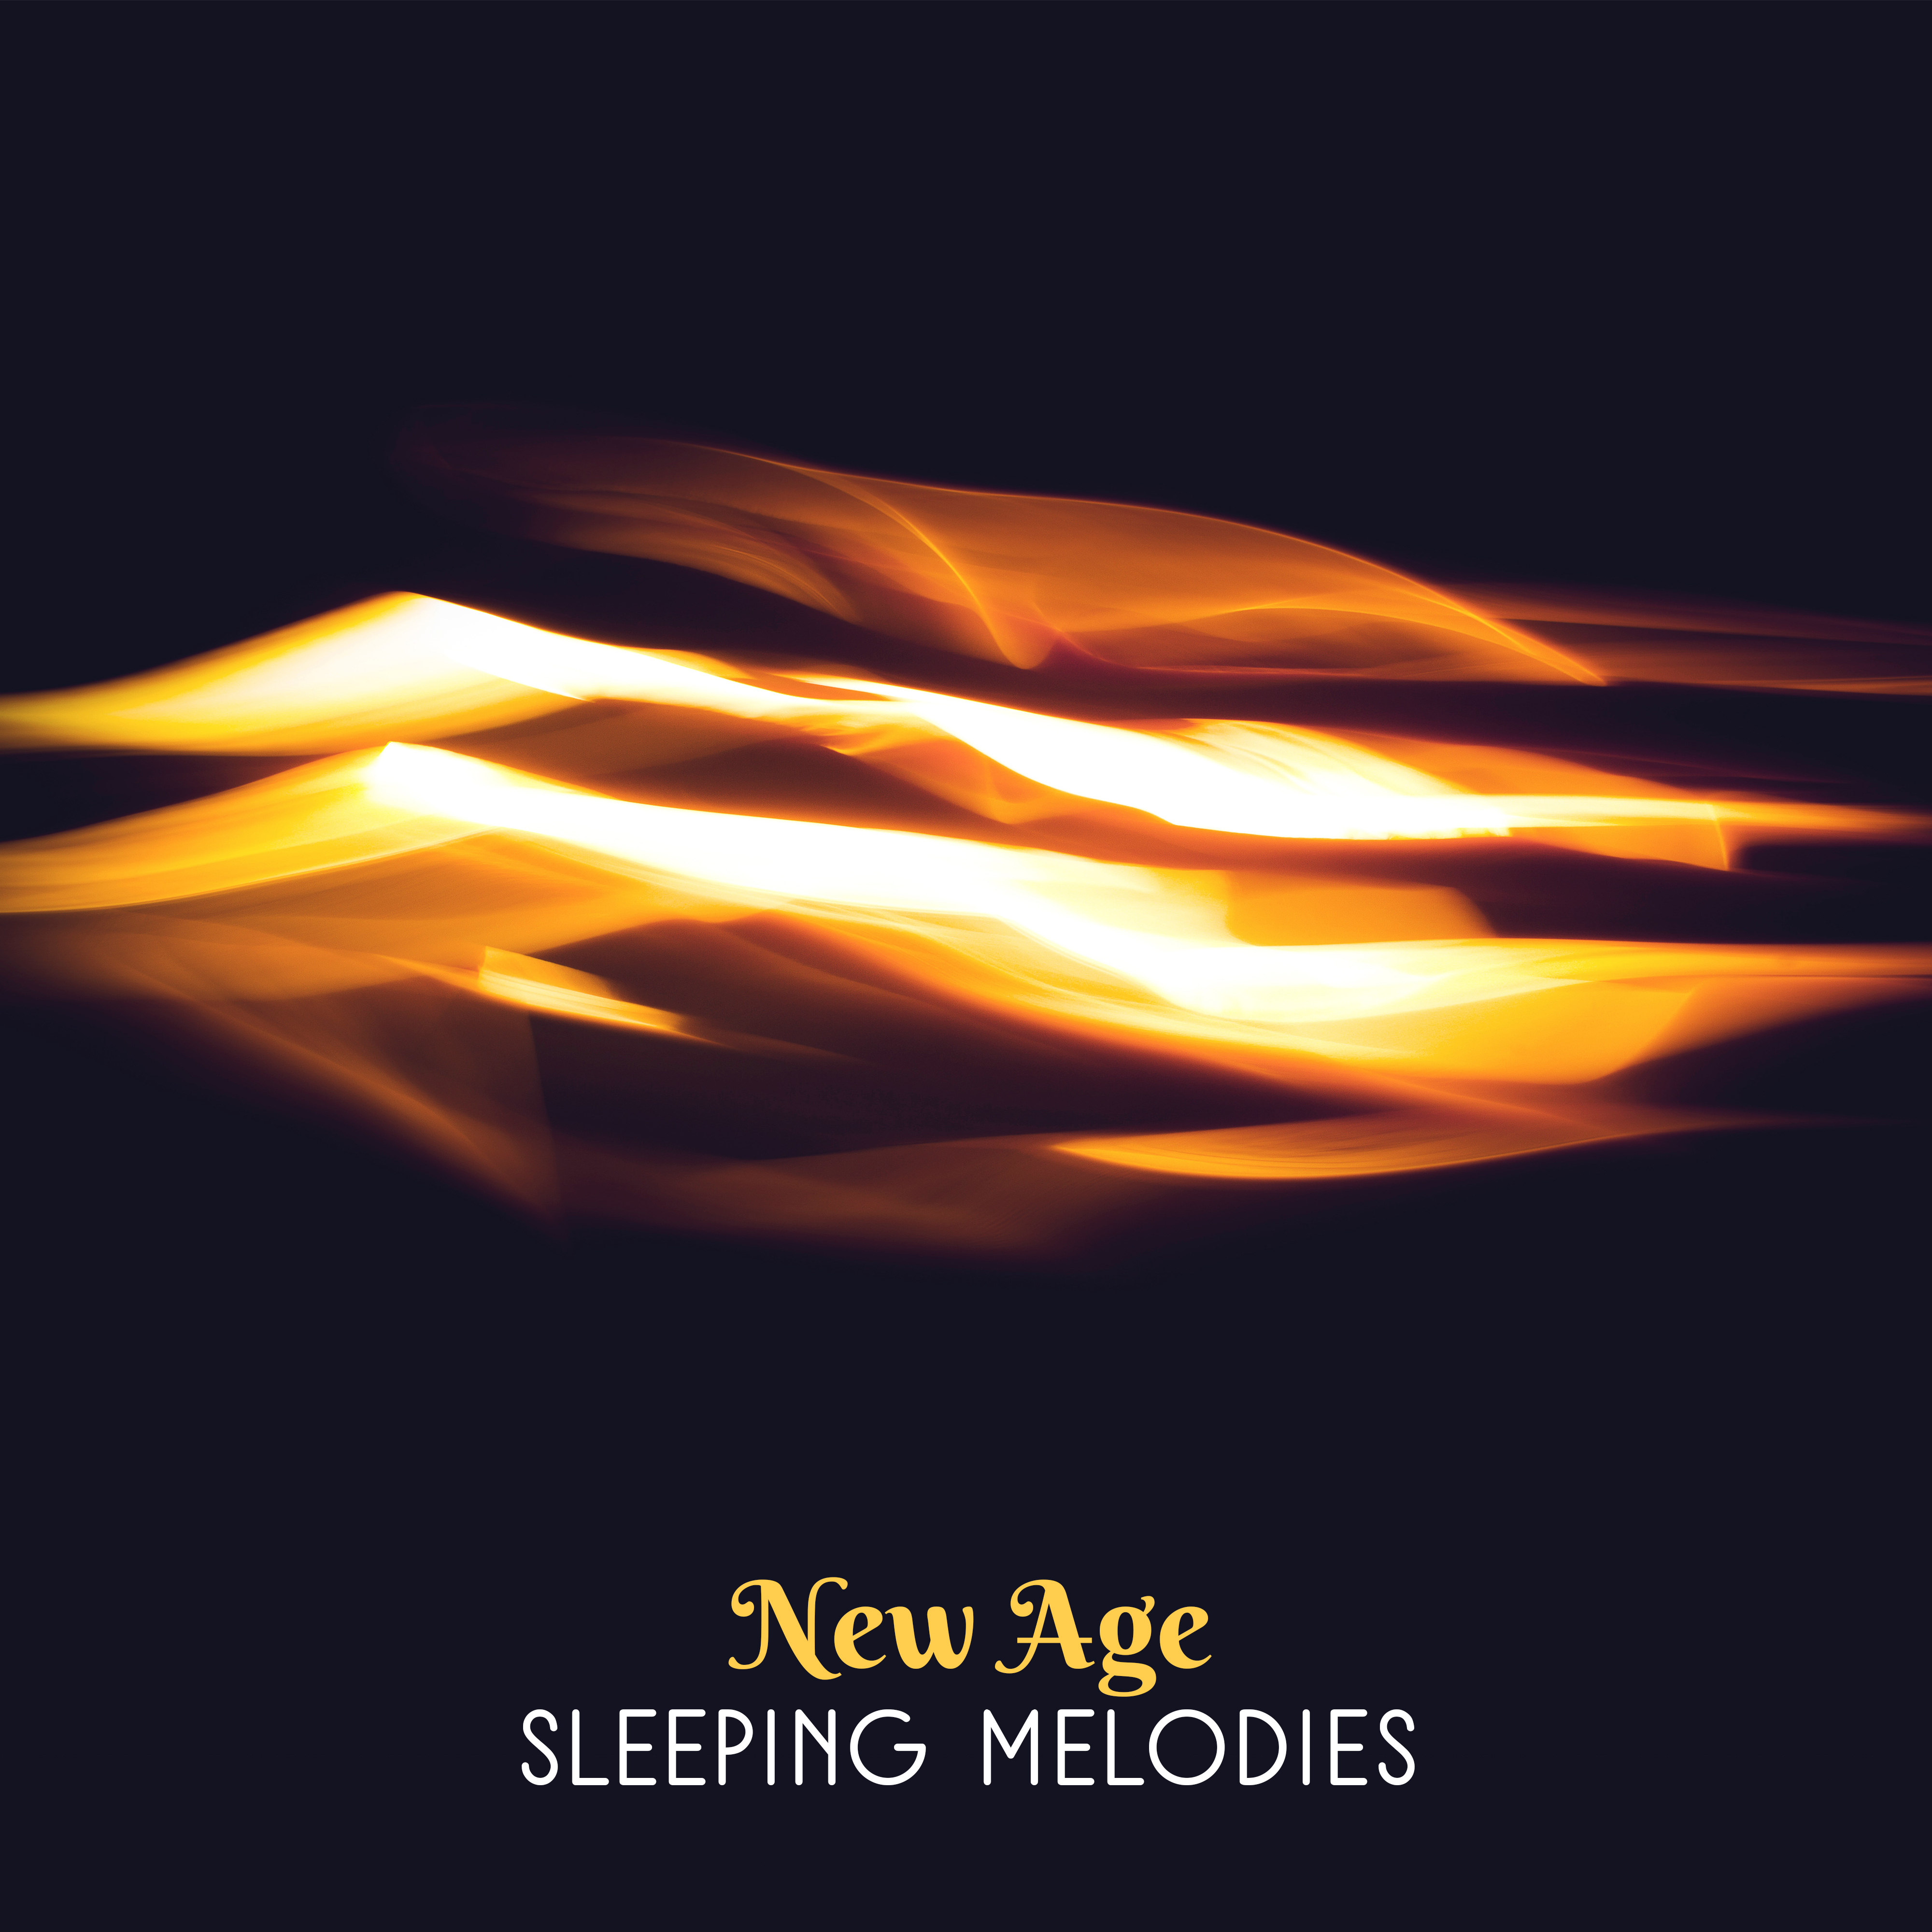 New Age Sleeping Melodies